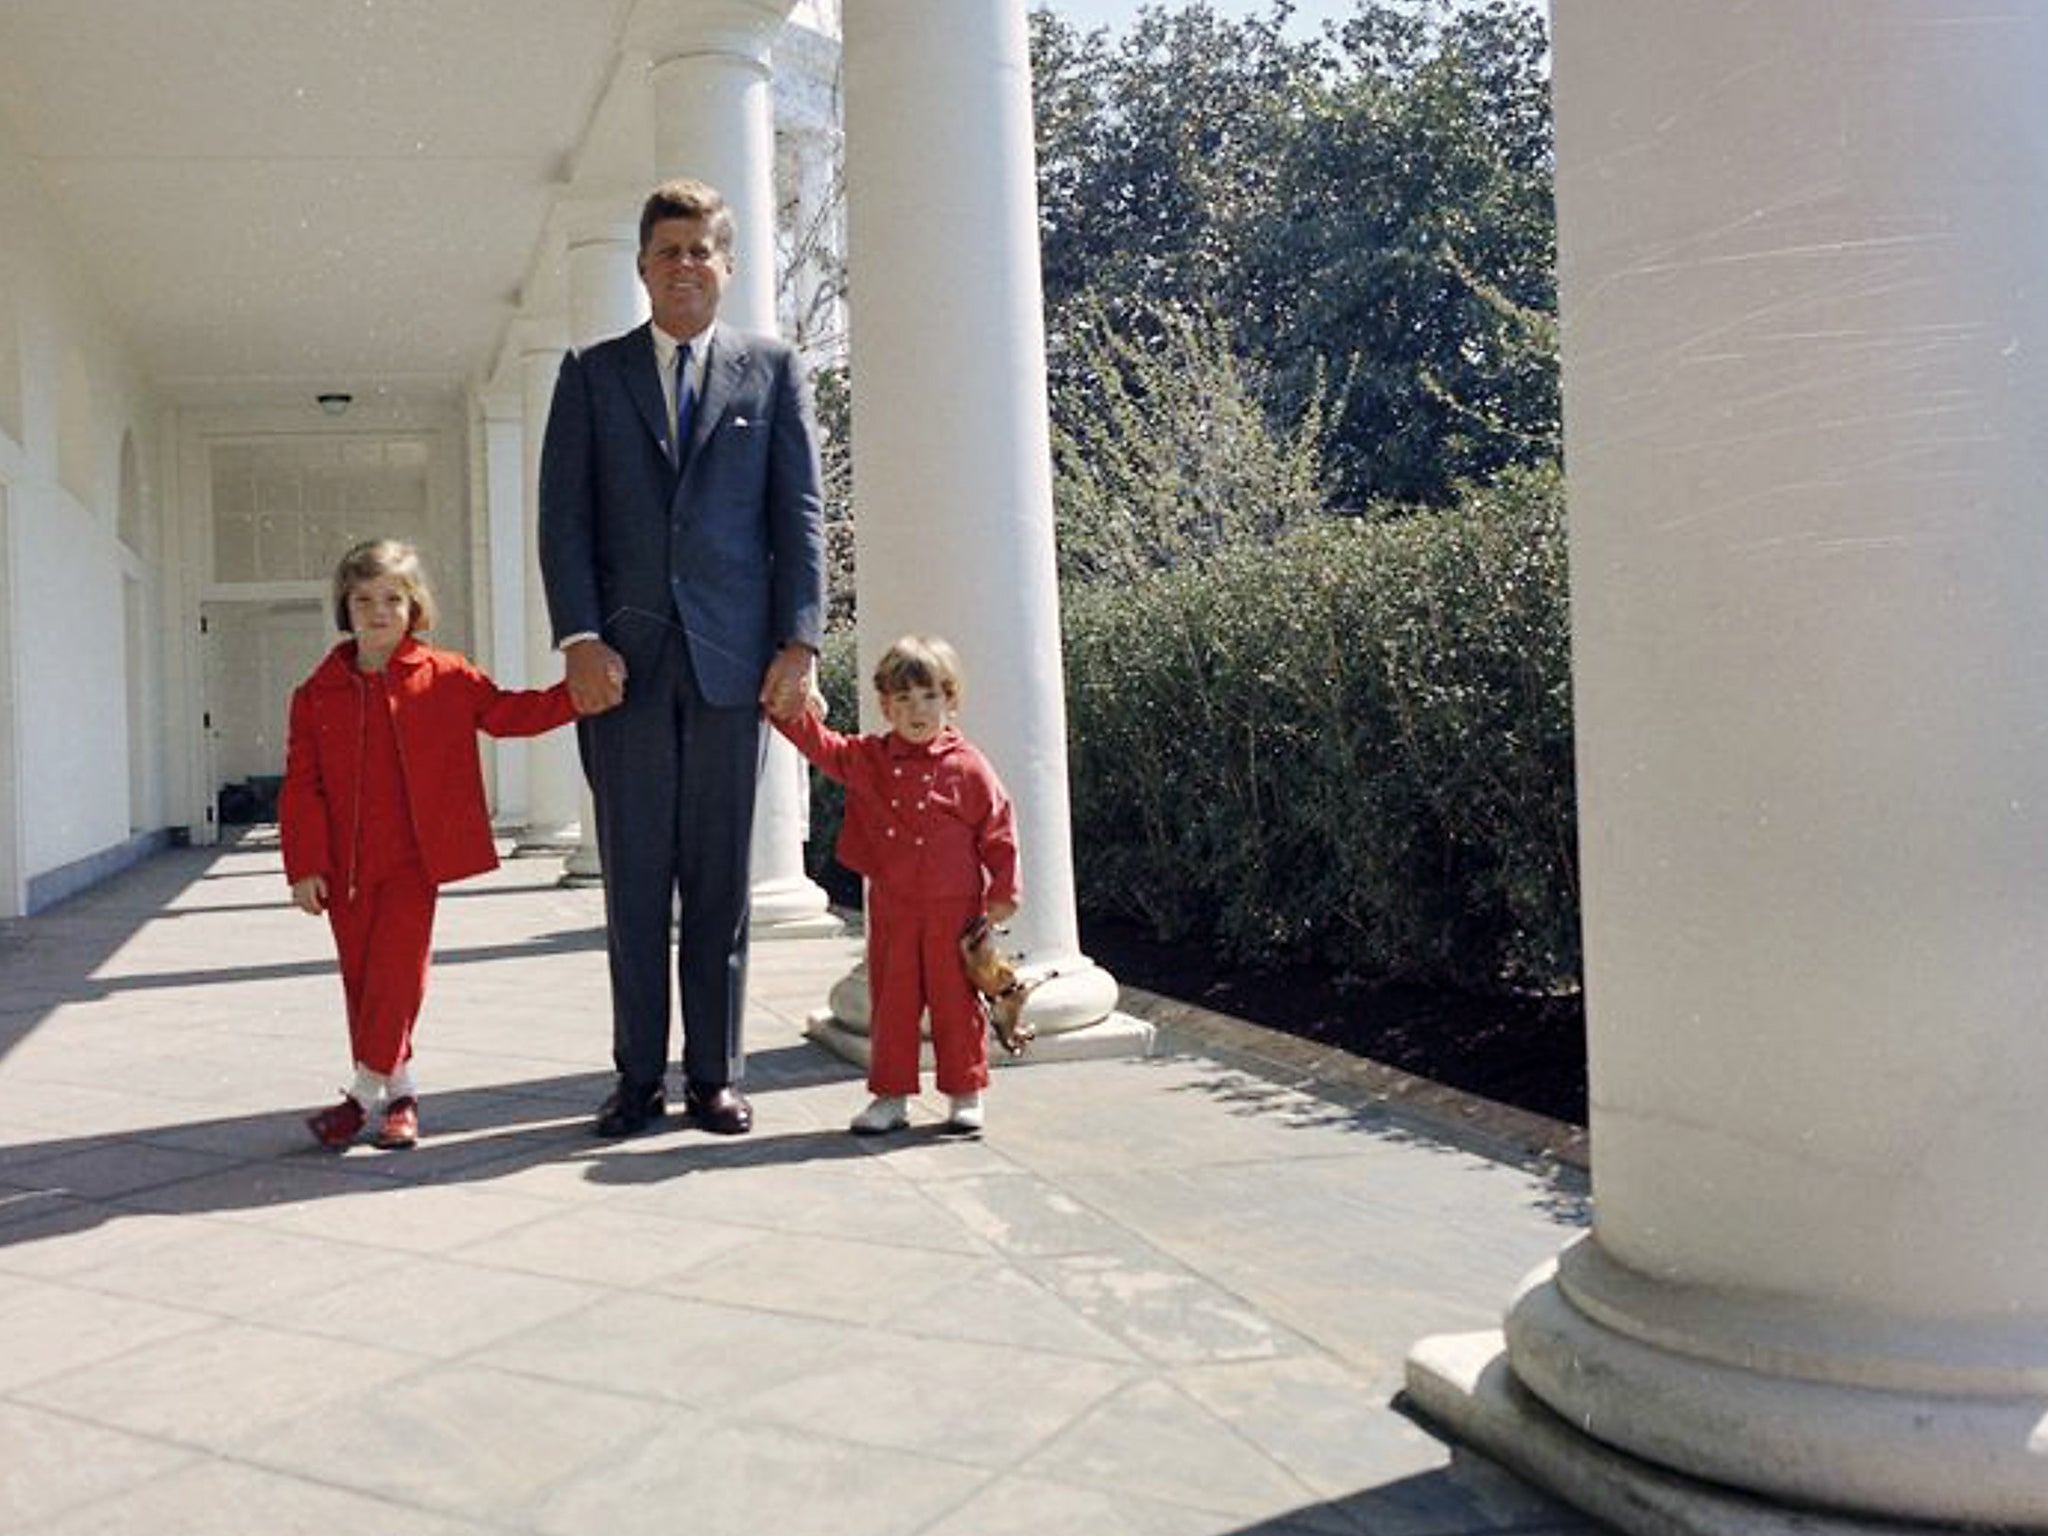 Kennedy with his children at the White House in March 1963